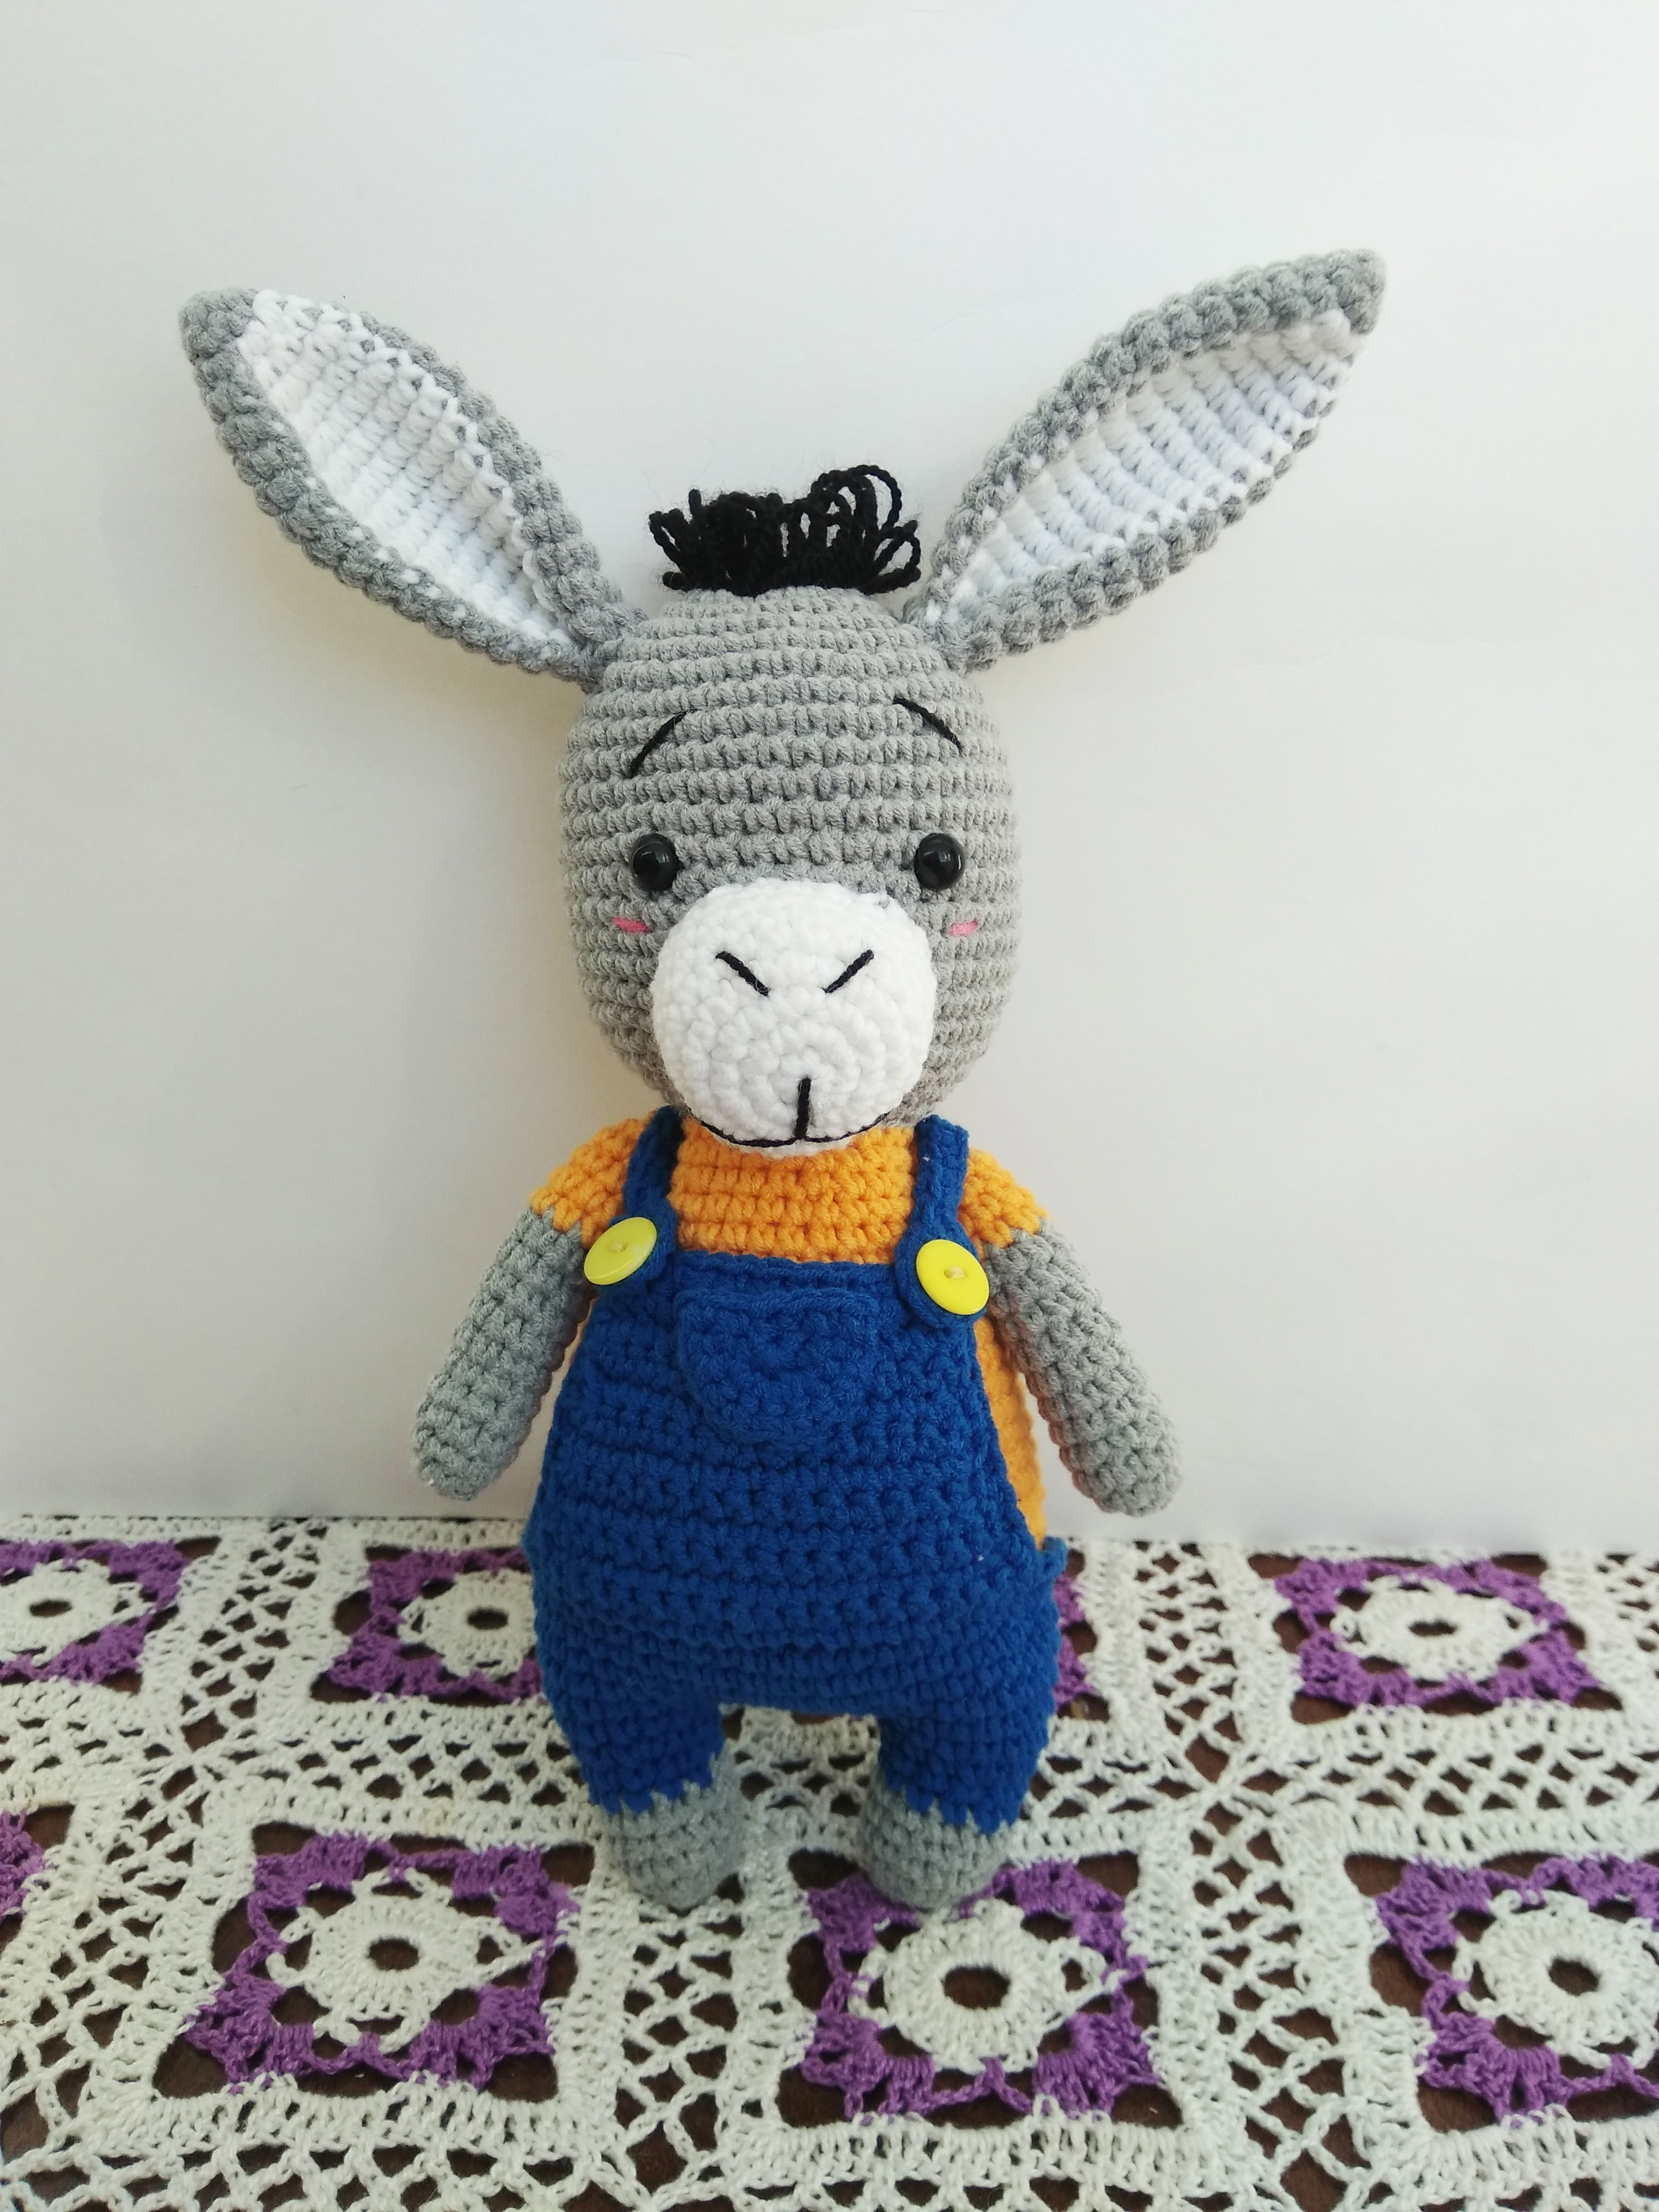 Handmade knitted toys. - My, Needlework, Needlework without process, Knitting, Crochet, Knitted toys, Handmade, Toys, Longpost